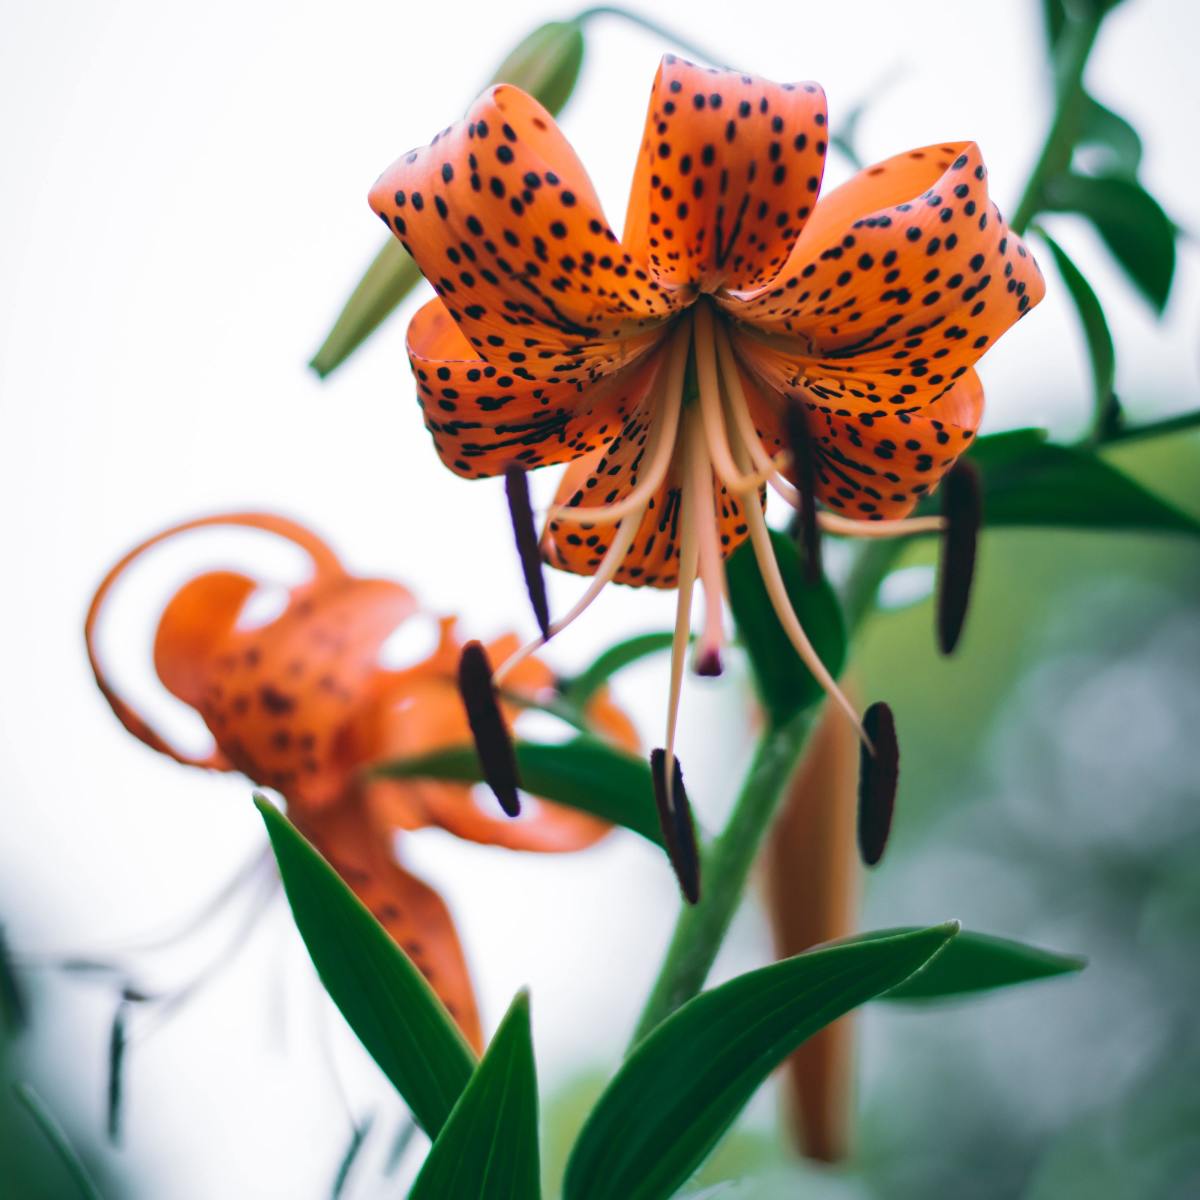 How to Propagate Tiger Lilies From Bulbils